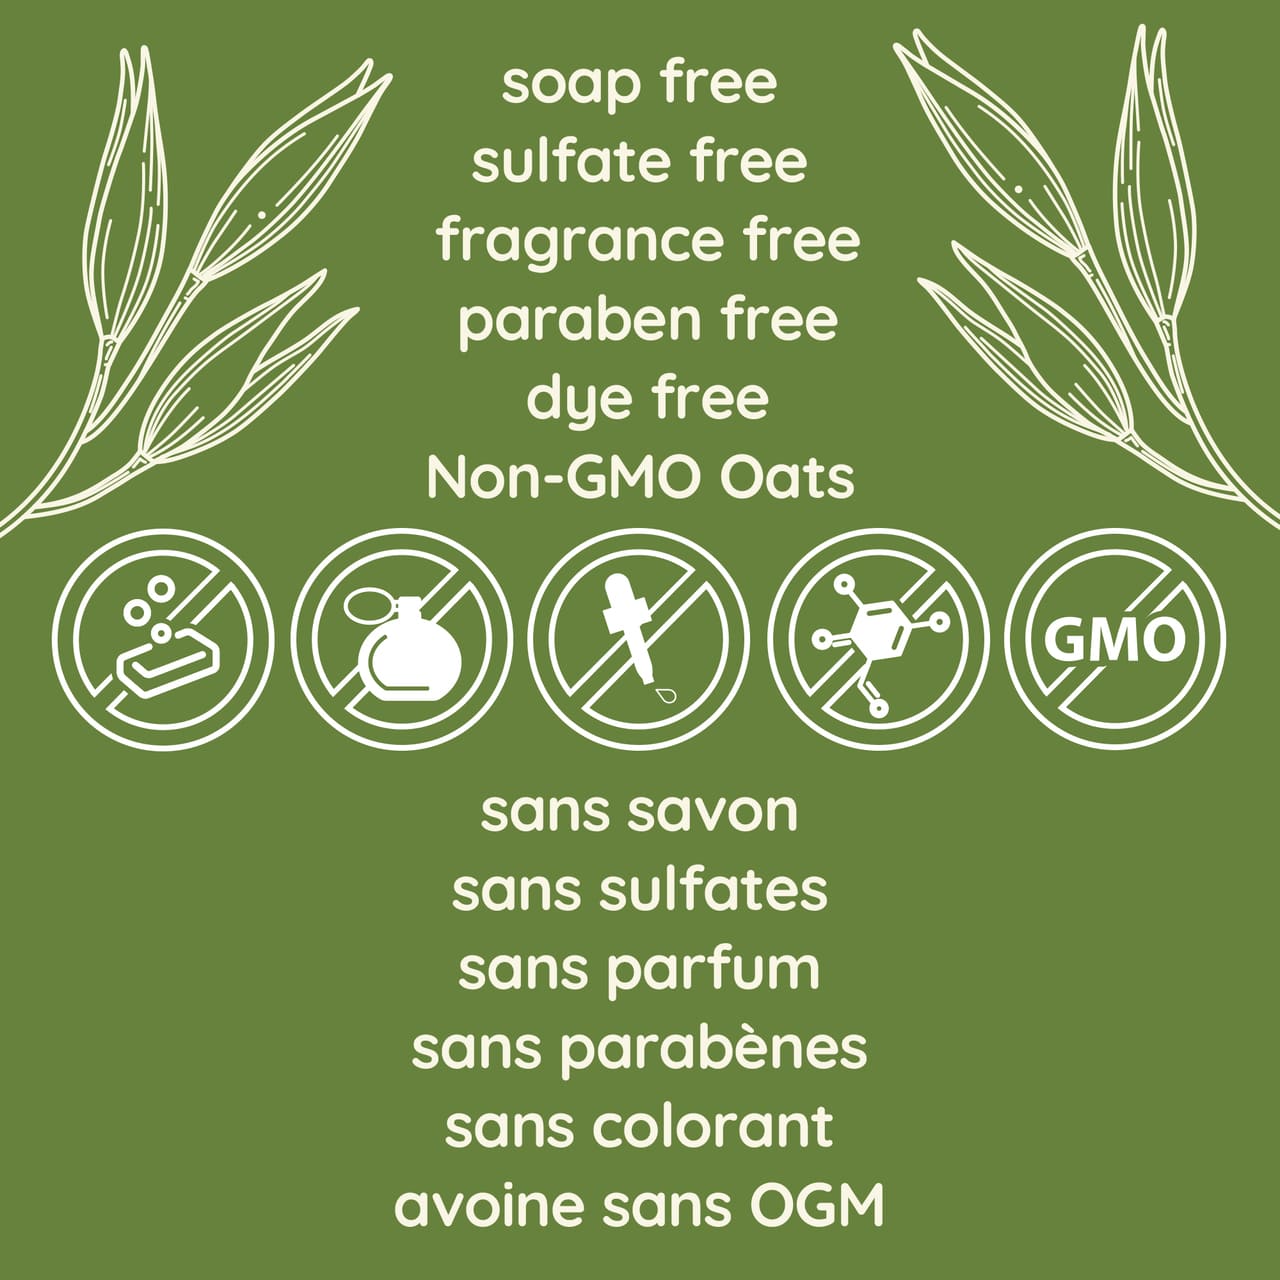 Text explaining that the product is free of soap, sulfate, fragrance, paraben, dye and non-GMO.